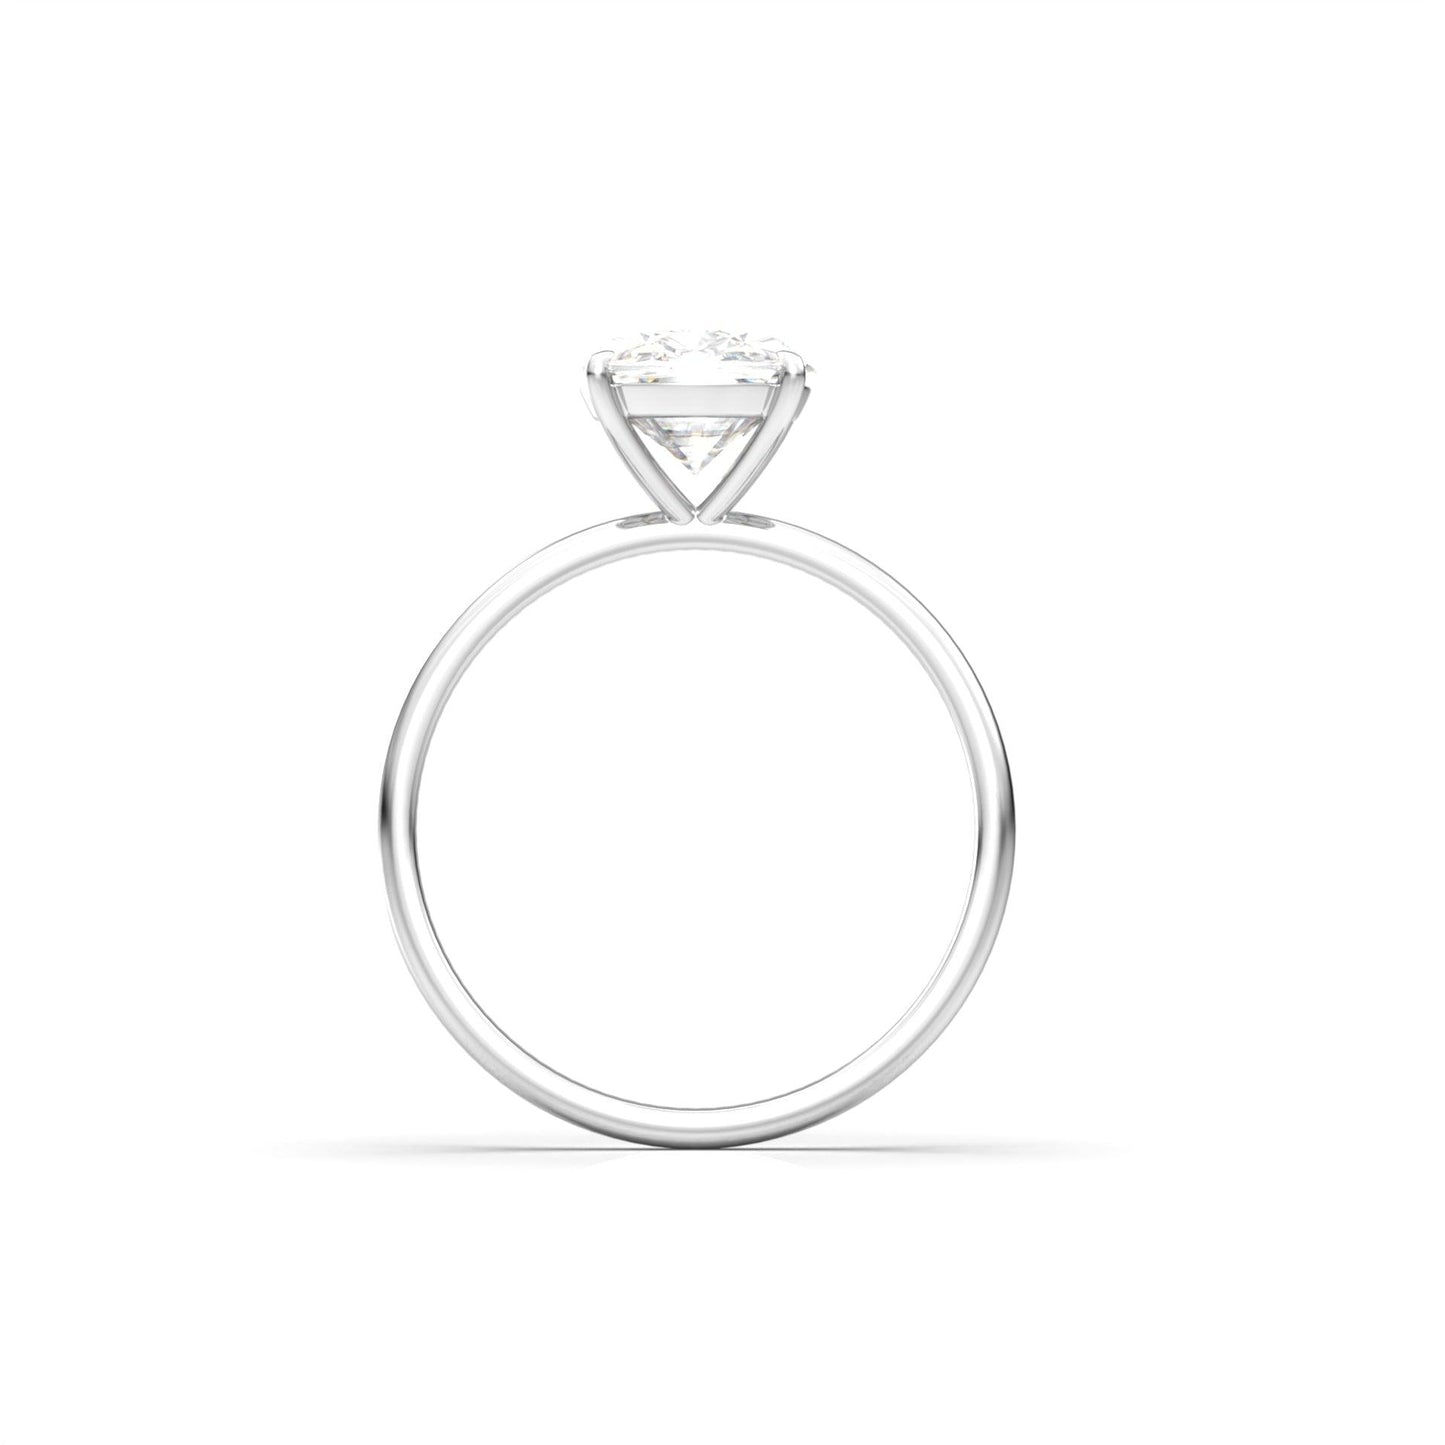 Cushion Cut 4 Claw Solitaire Ring - moissaniteengagementrings